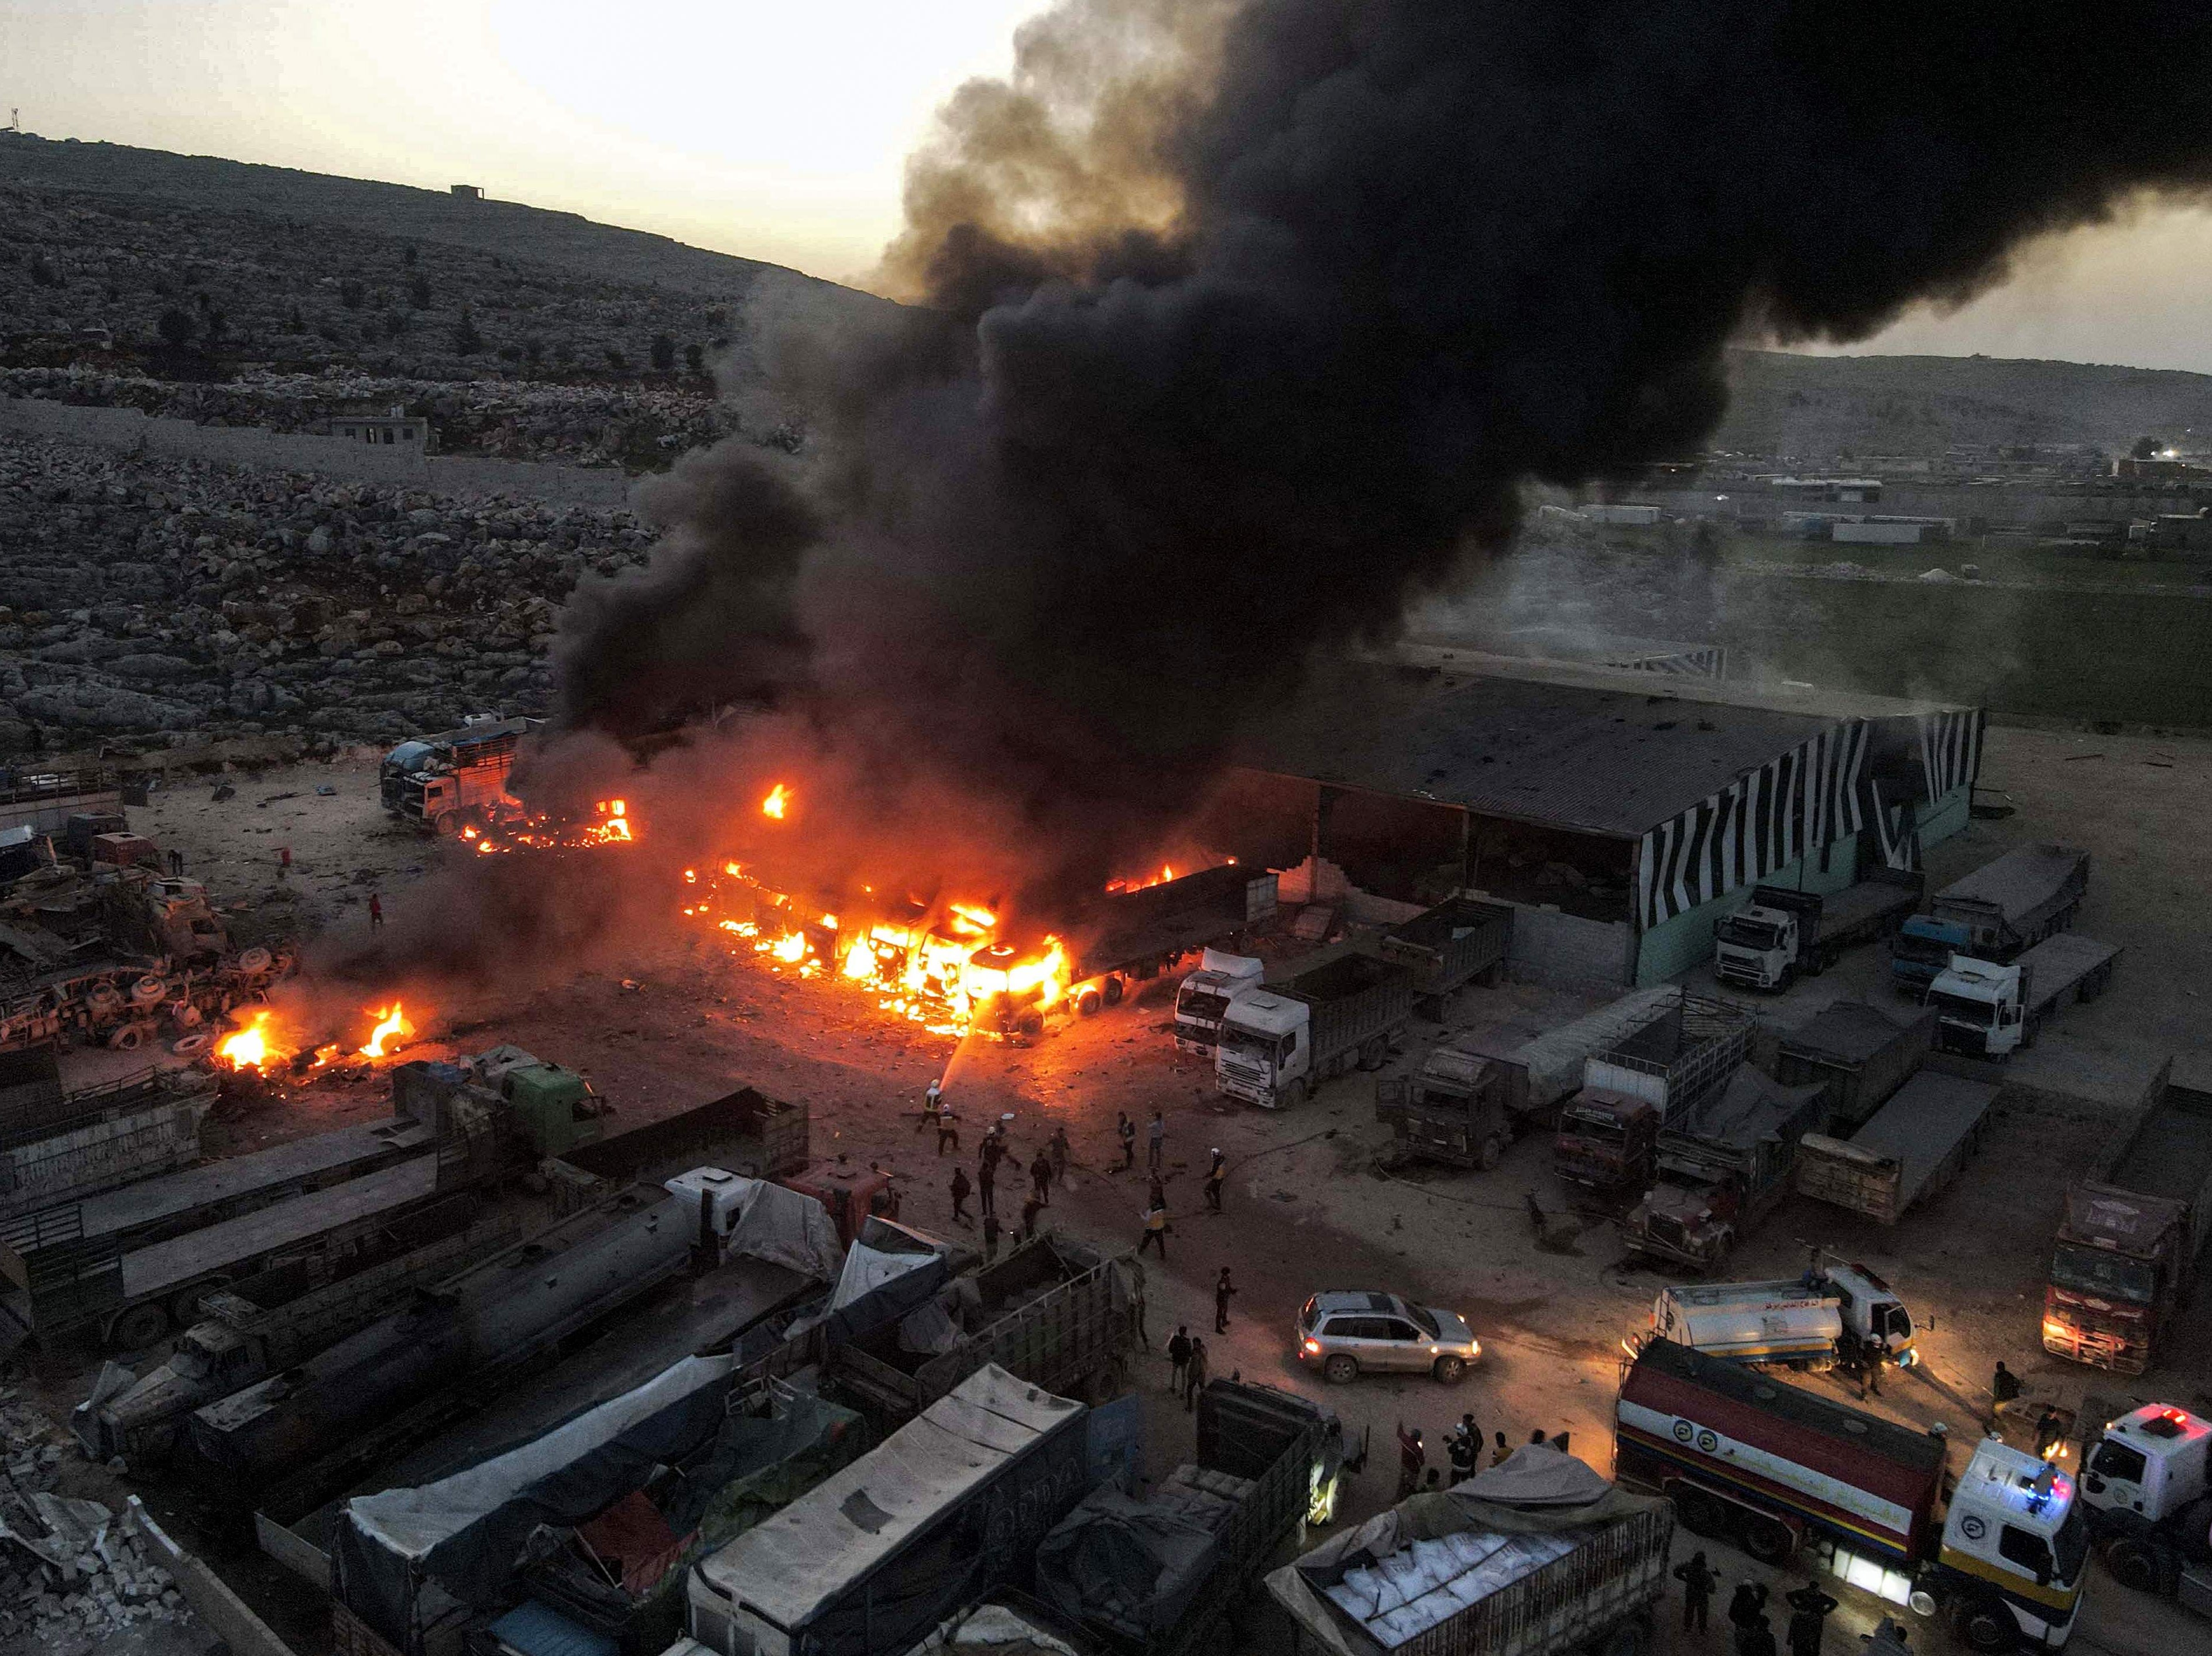 An aerial view of billowing smoke coming from burning trucks and freight vehicles